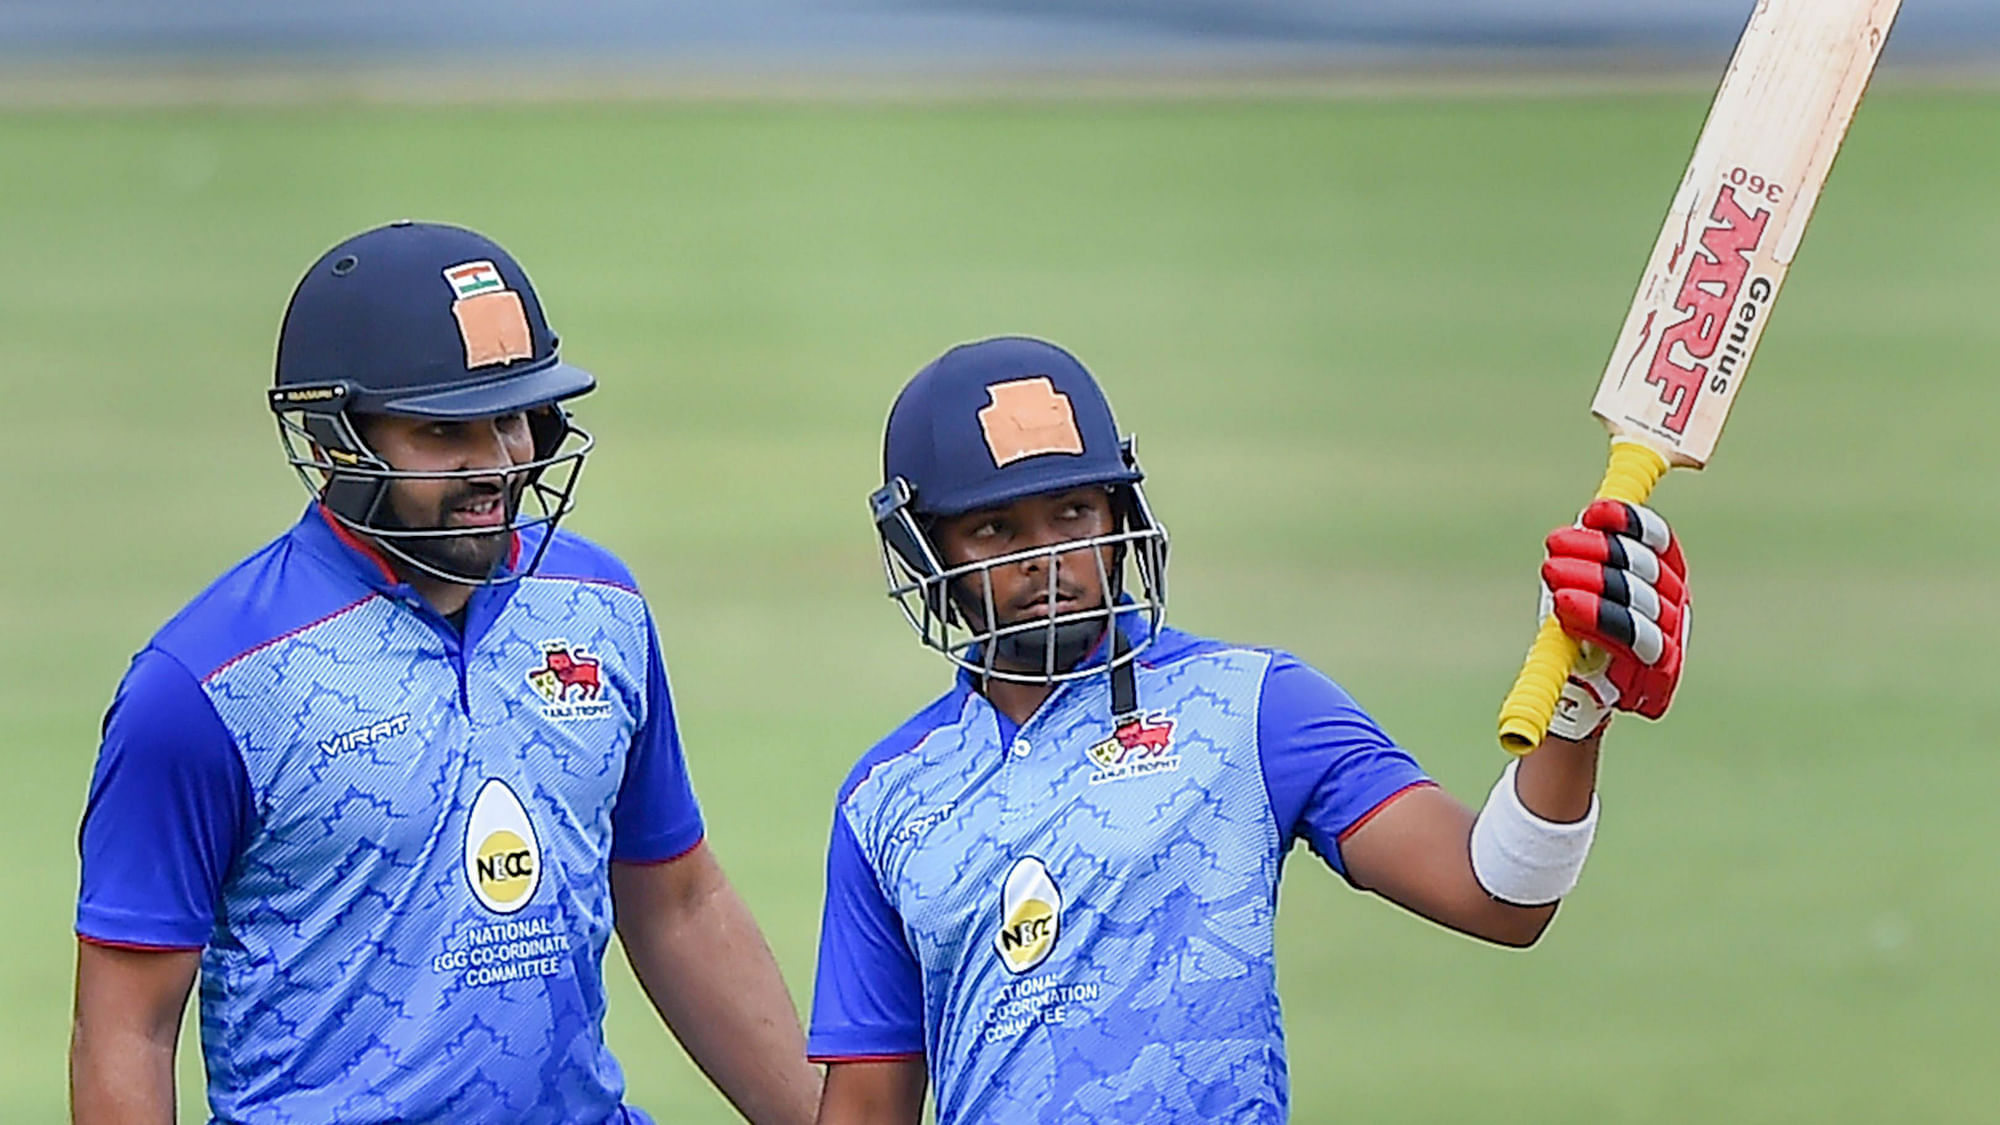 Mumbai openers Rohit Sharma (17) and Shaw (61) stitched a 73-run opening stand in the Vijay Hazare Trophy semi-final.